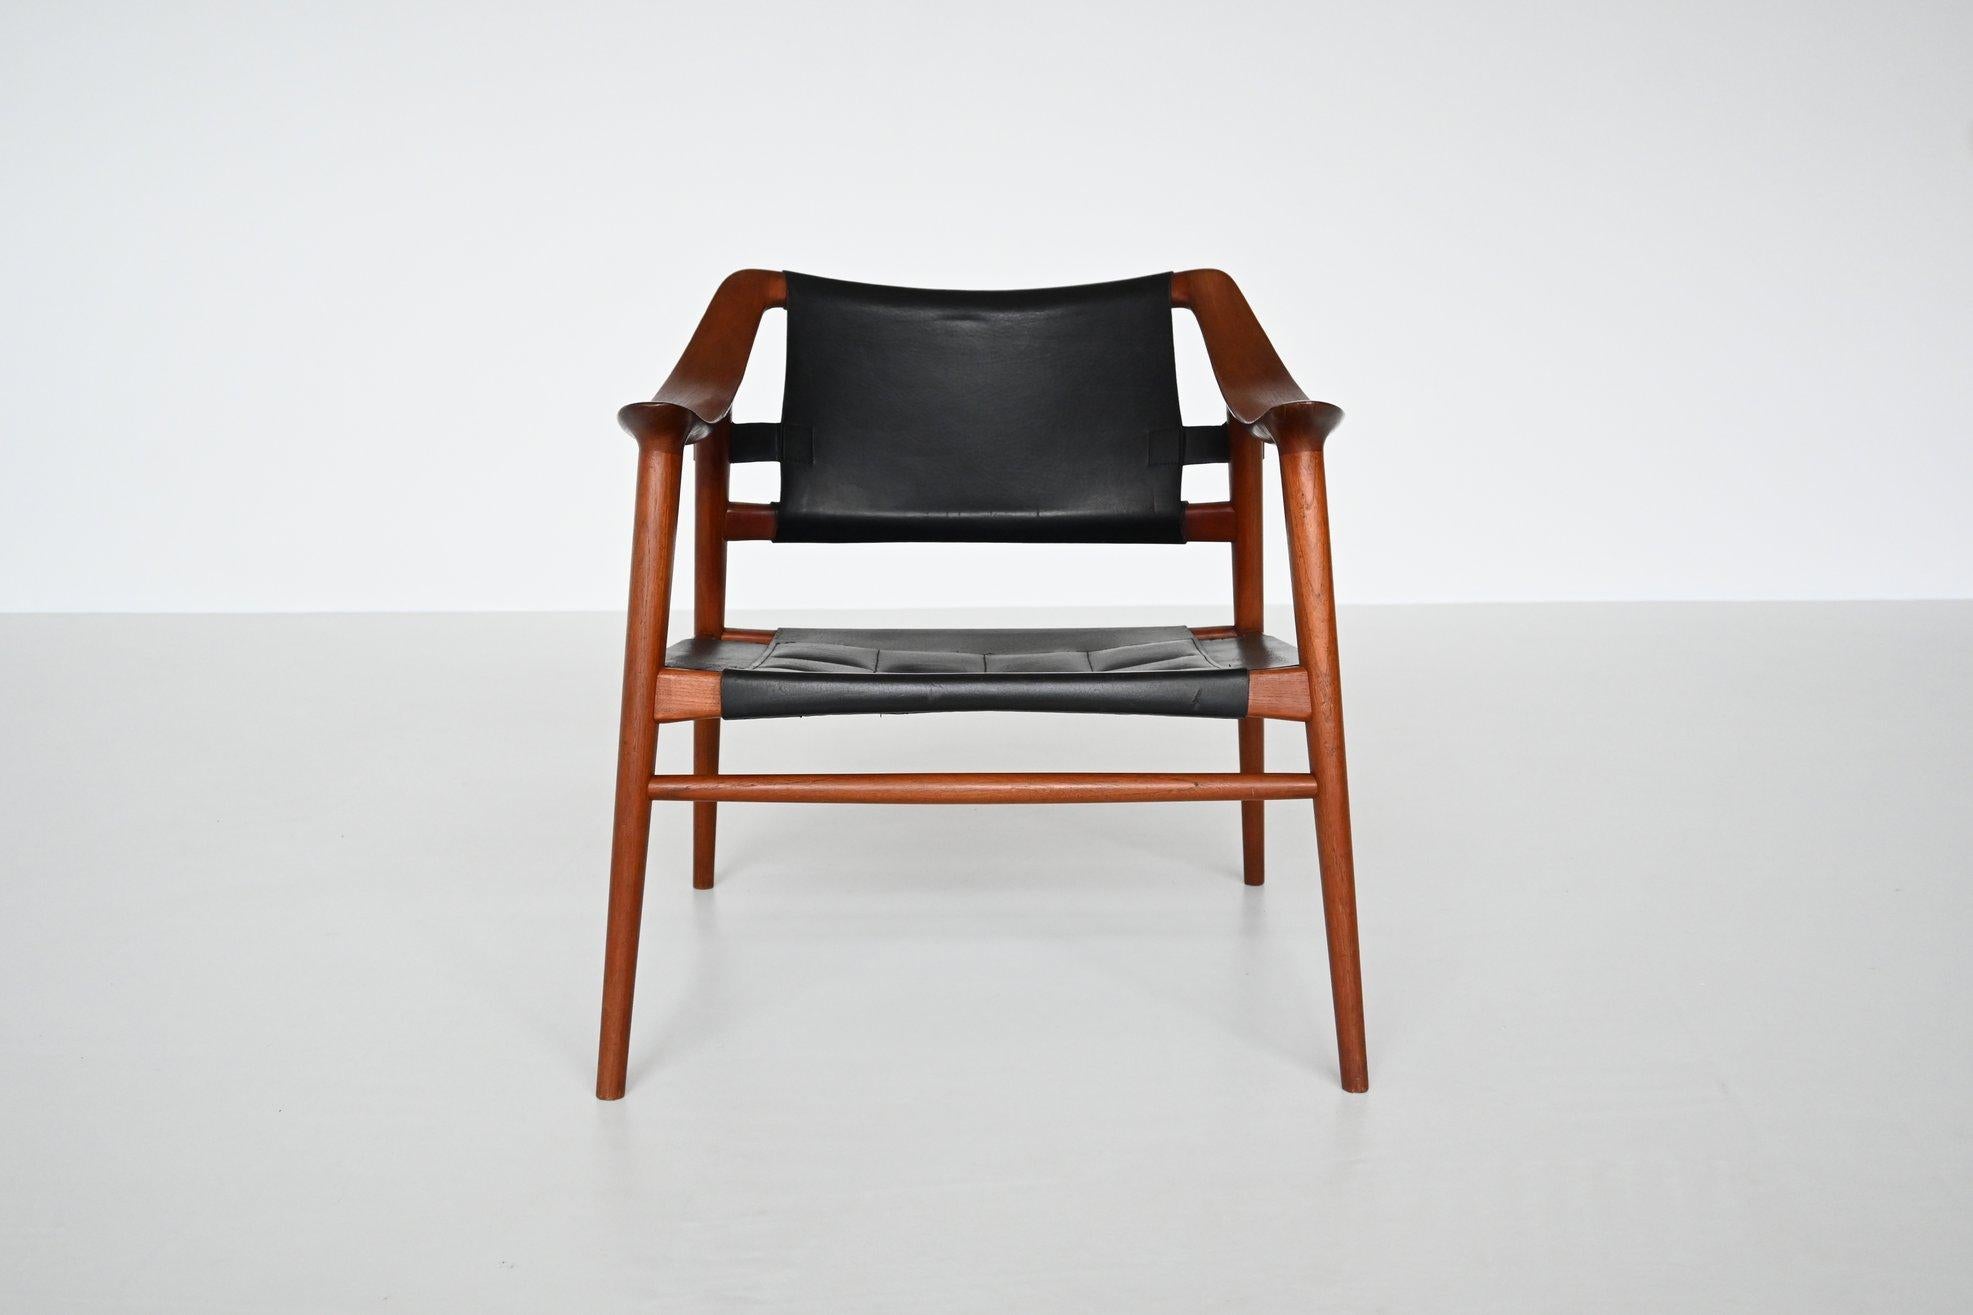 Stunning lounge chair model 56/2 designed by Rolf Rastad and Adolf Relling for Gustav Bahus, Norway, 1954. This beautiful shaped sculptural lounge chair was called ‘Bambi’. It has a solid teak wood frame with a black saddle leather stitched seat and